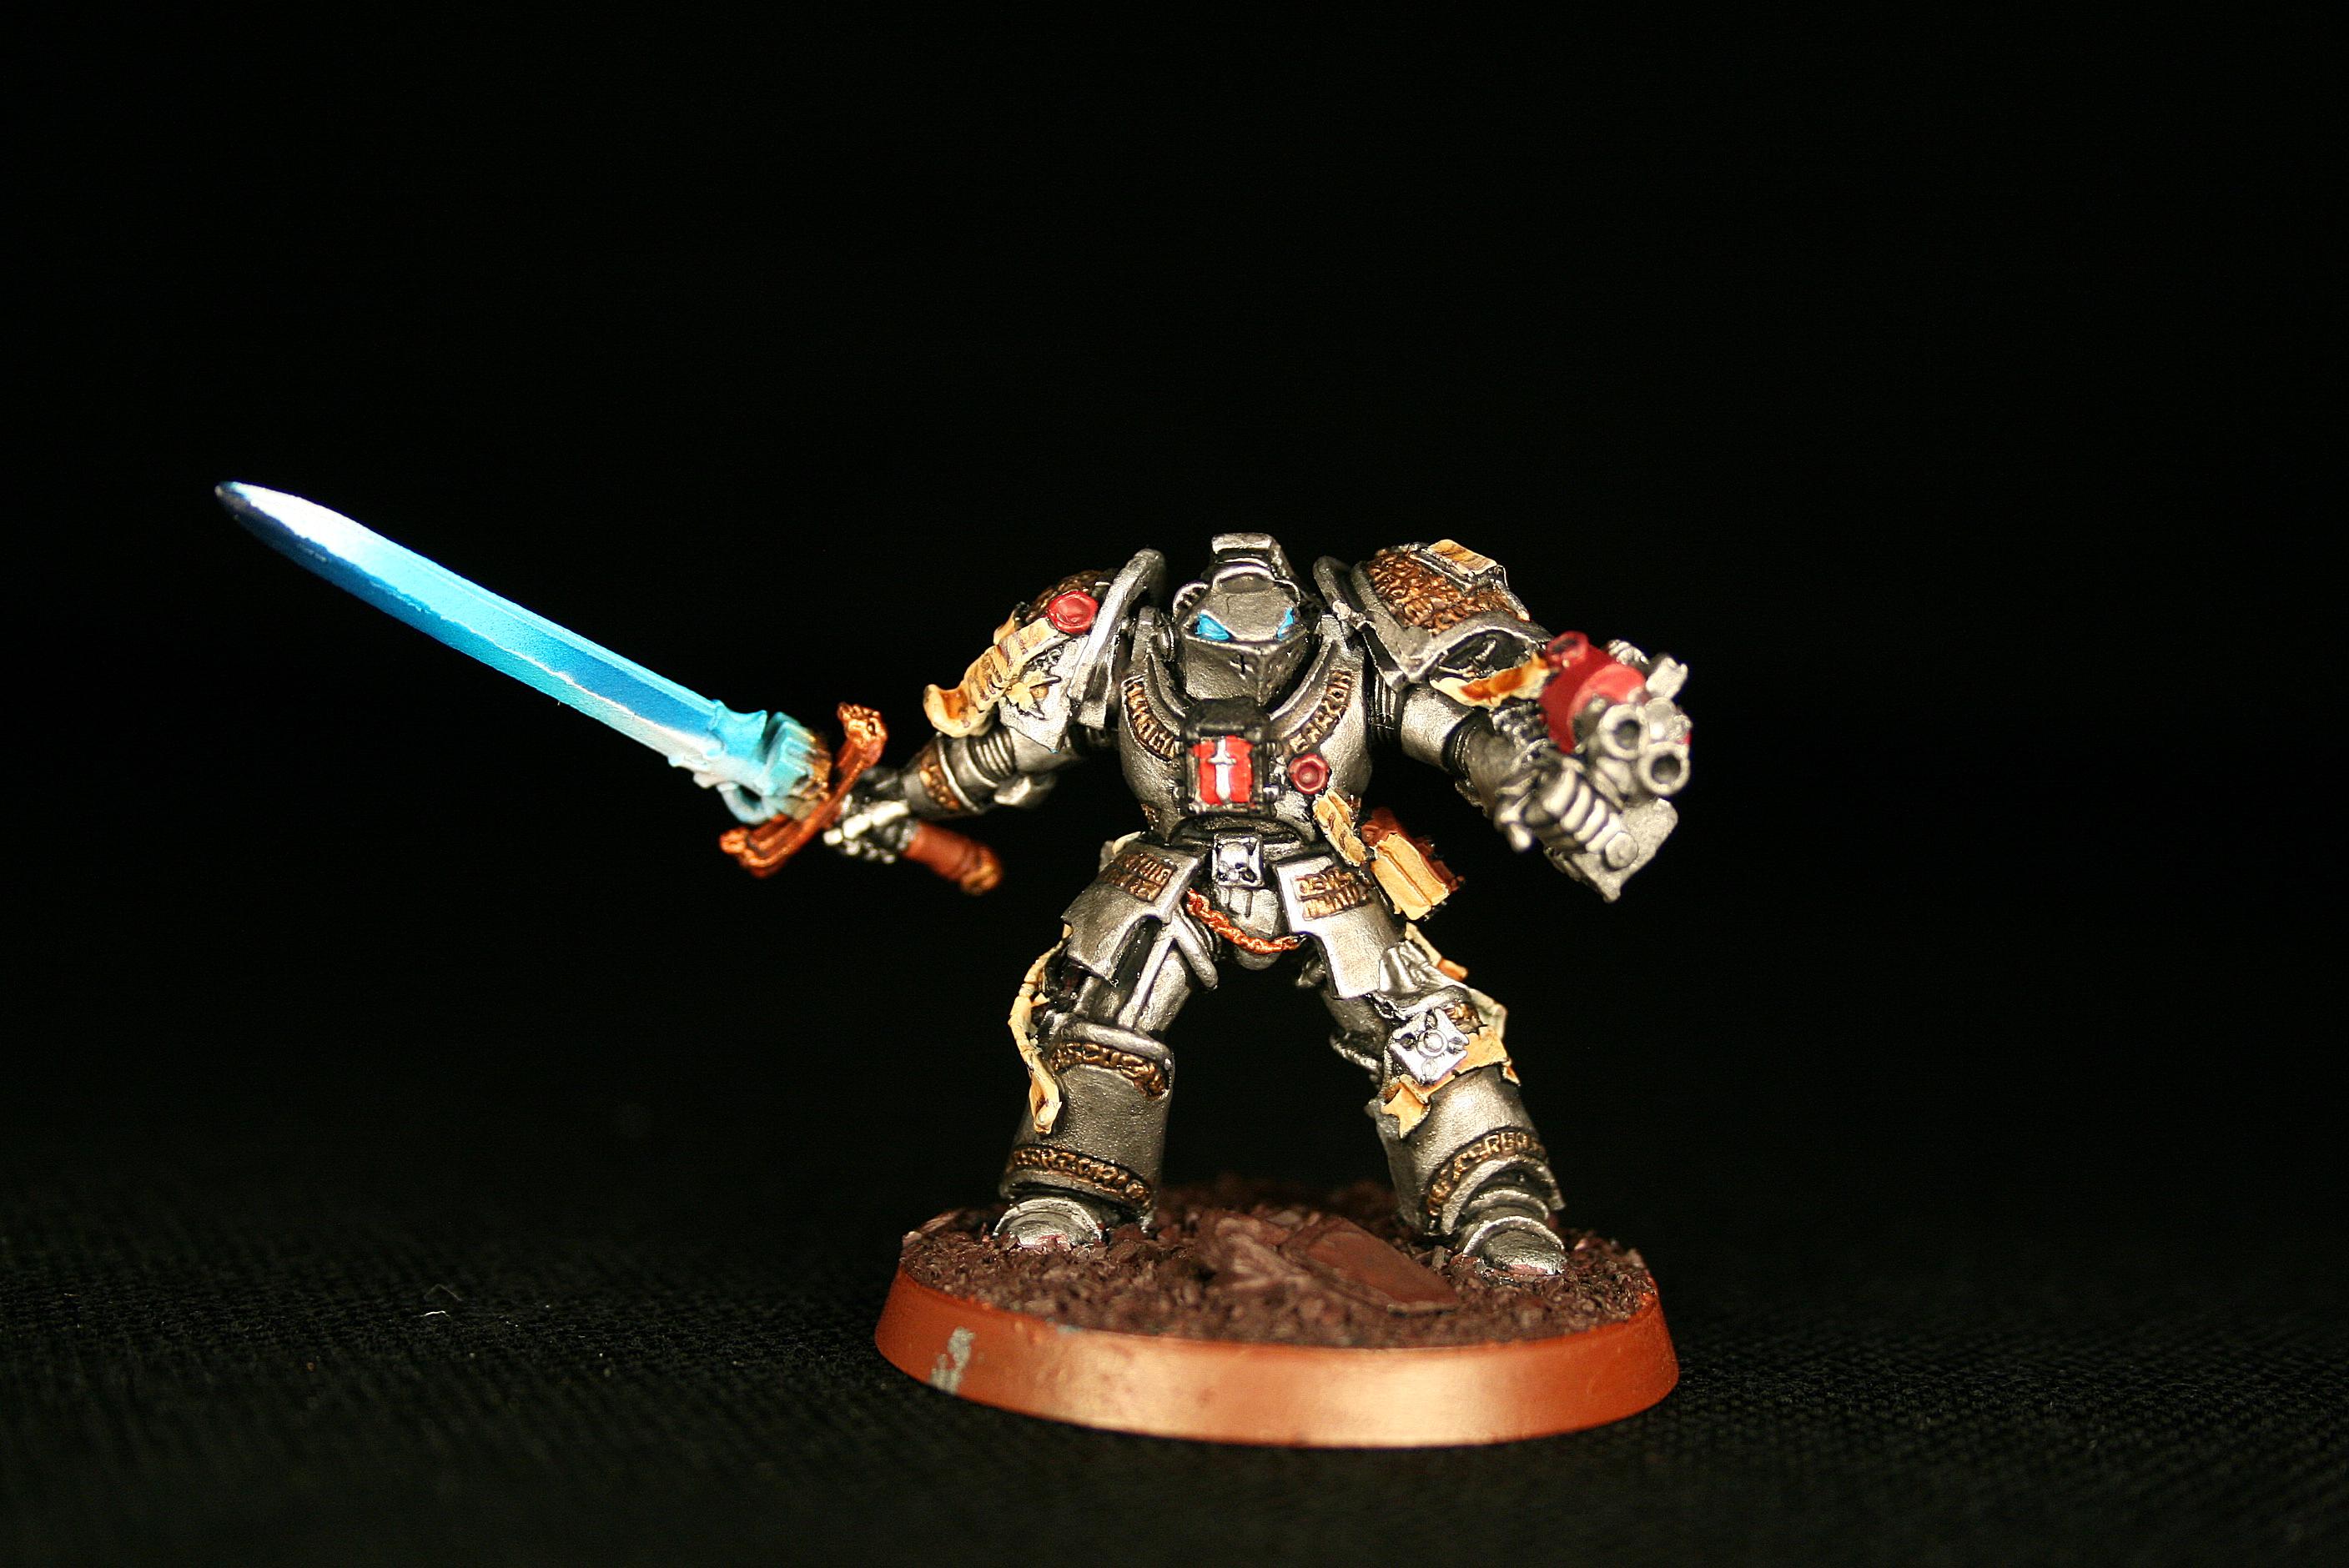 Force Weapon, Force Weapons, Grey Knights, Sword, Terminator Armor